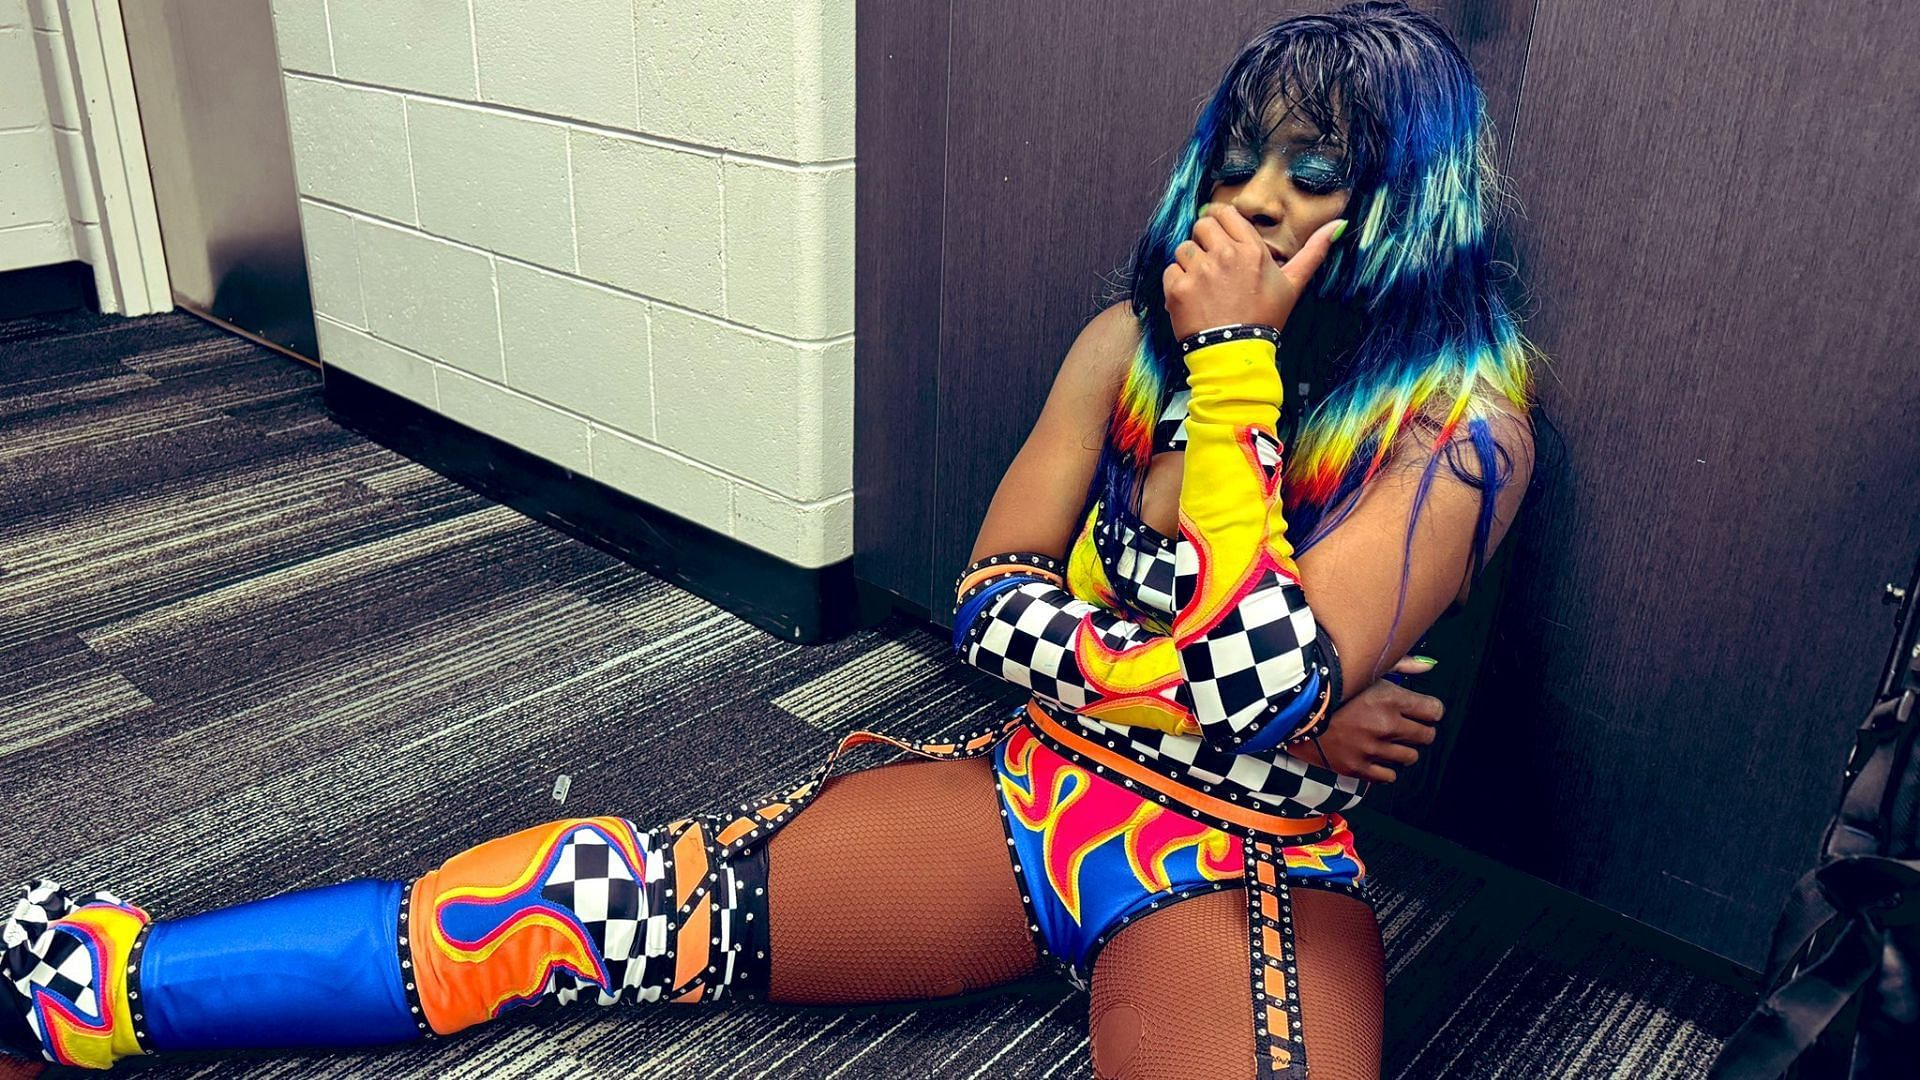 Naomi backstage on after her loss on SmackDown.